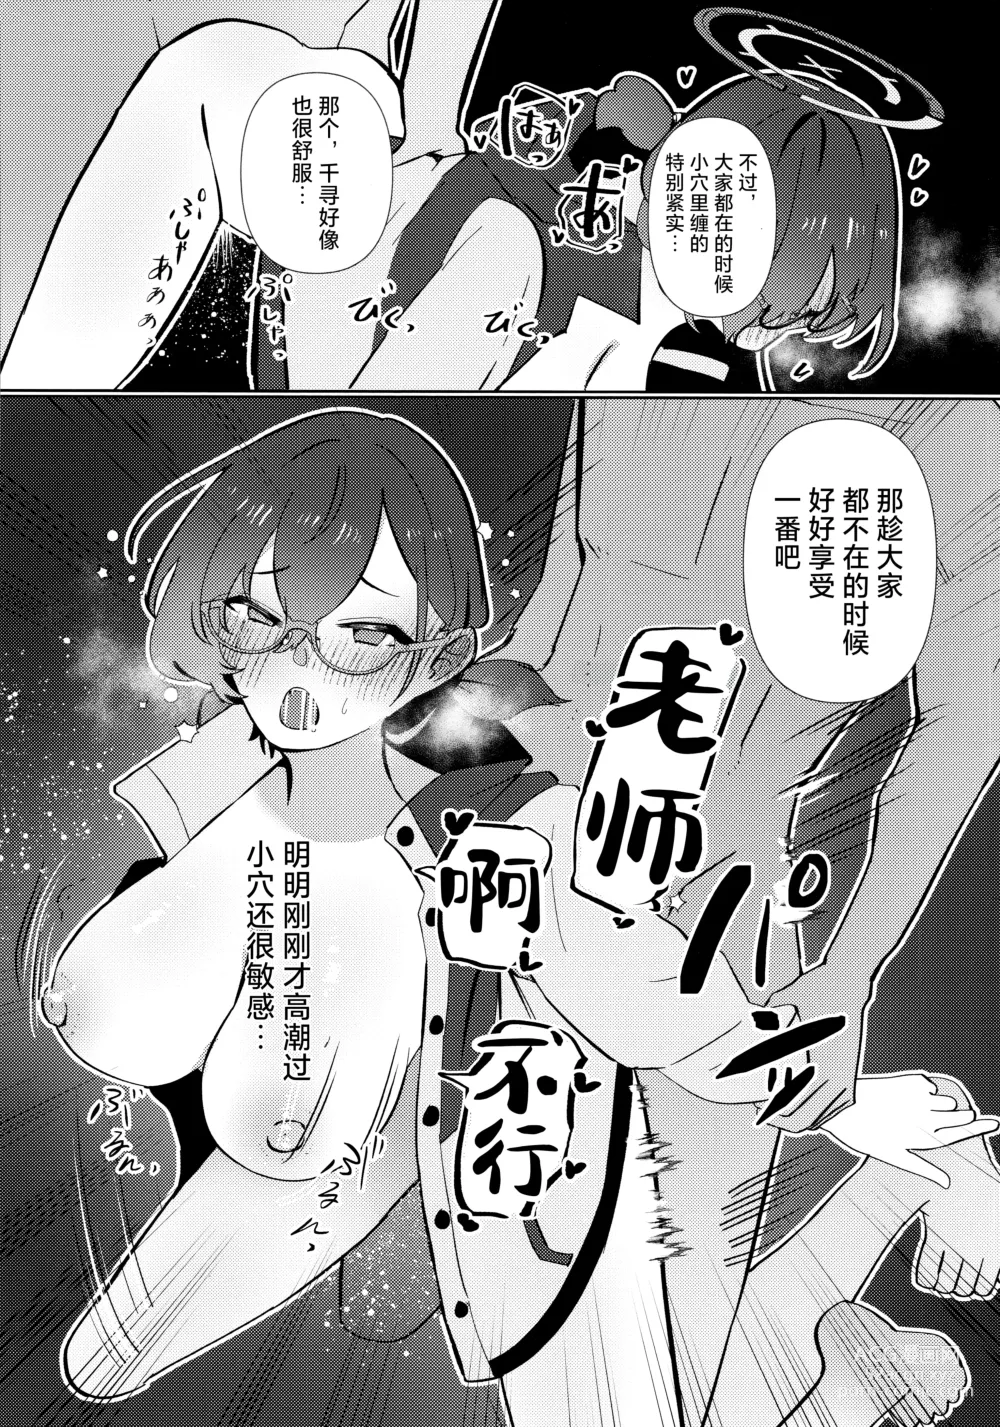 Page 17 of doujinshi 夜半时分的骇入